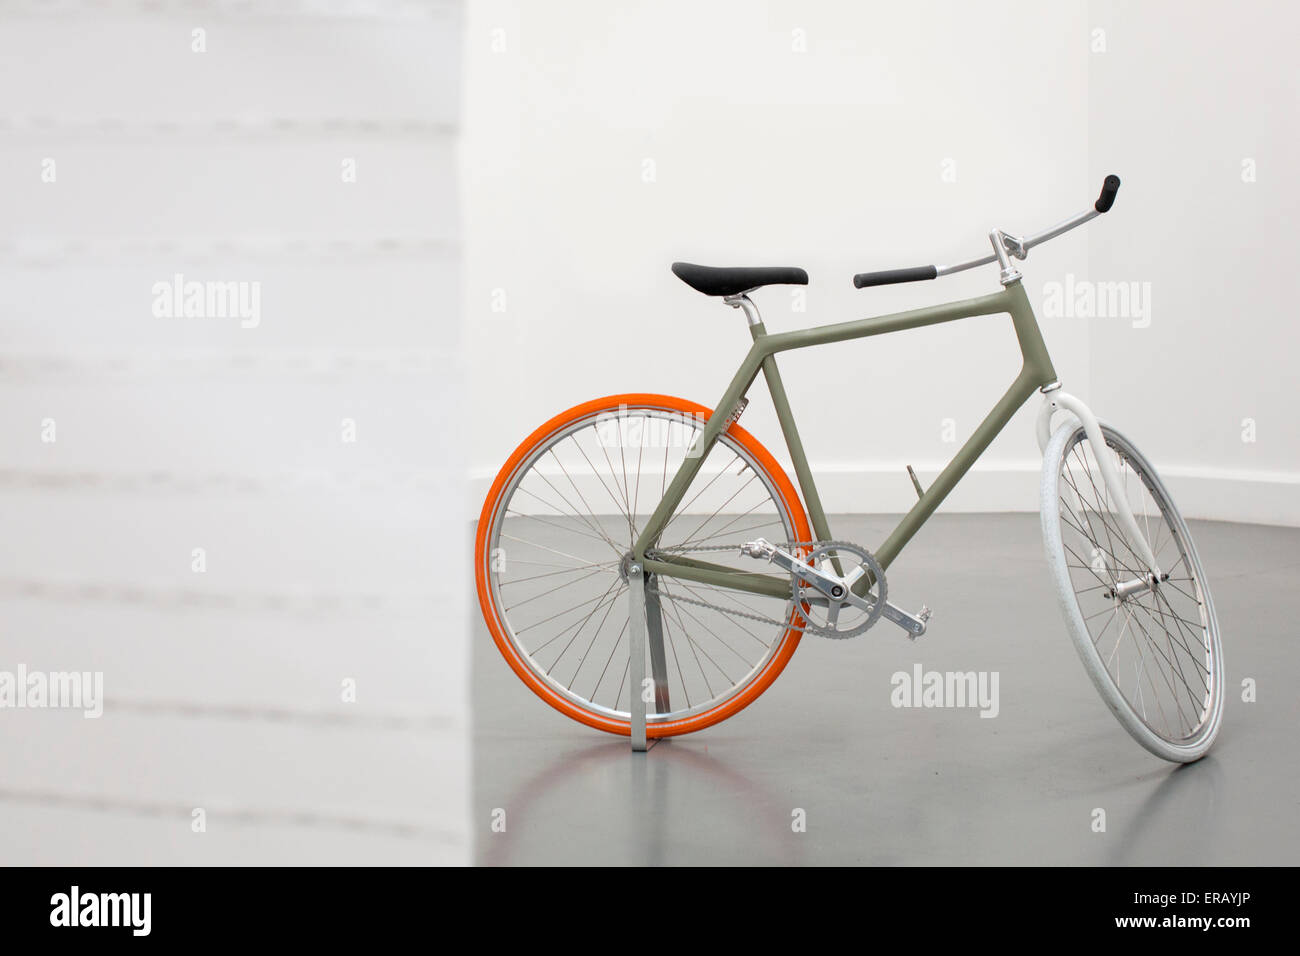 Design bicycle designed by Anne Pabon shown at the Dutch Design week, van Abbe museum in Eindhoven (Noord-Brabant) Netherlands. Stock Photo